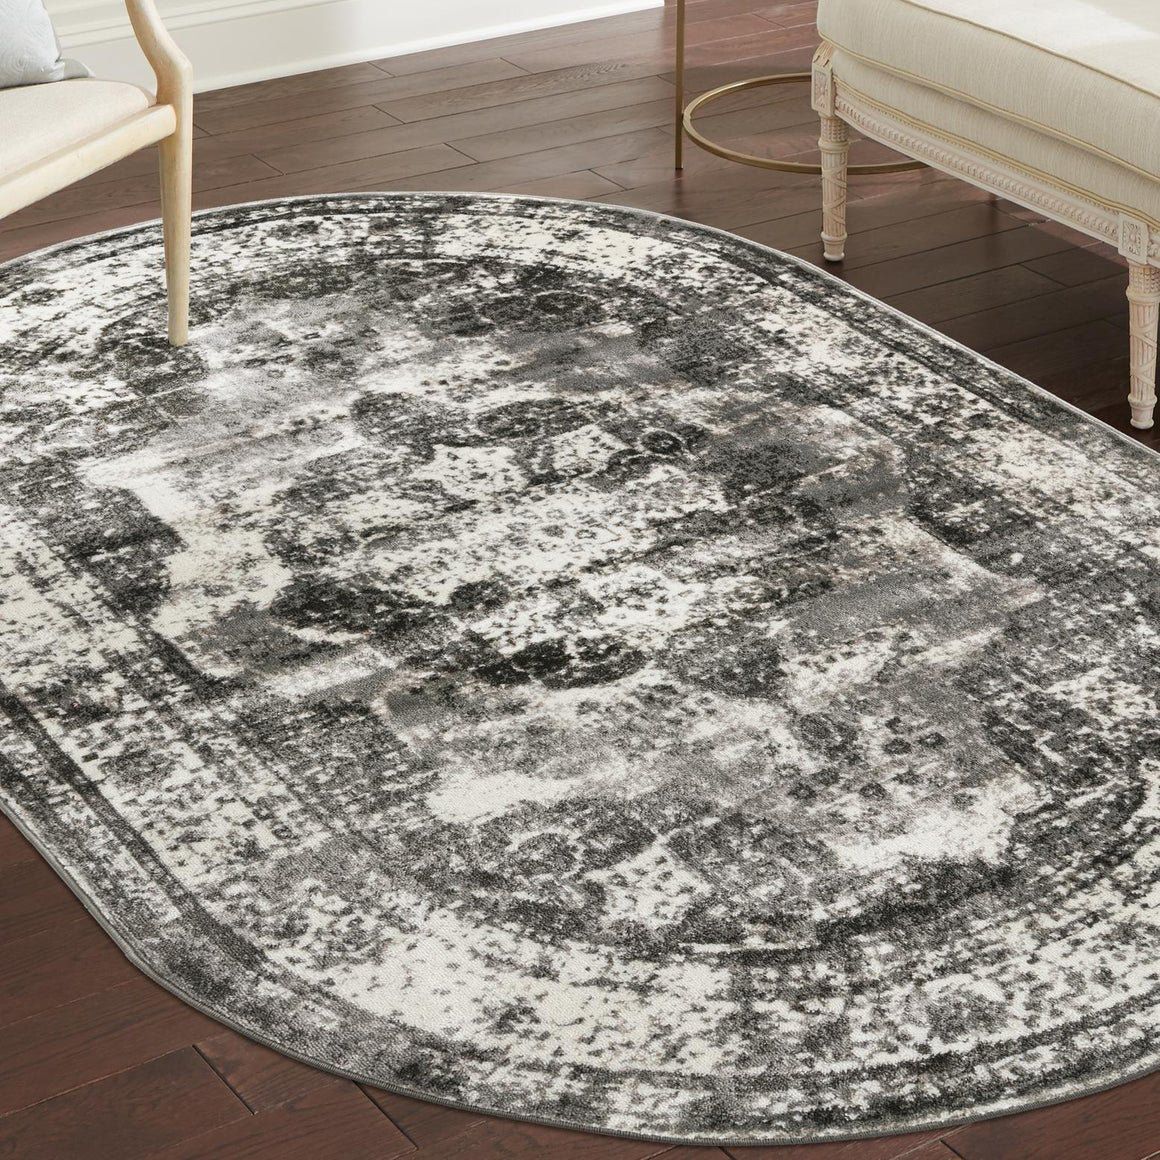 Wayfair | 2' X 3' Oval Area Rugs You'Ll Love In 2023 Pertaining To Timeless Oval Rugs (View 14 of 15)